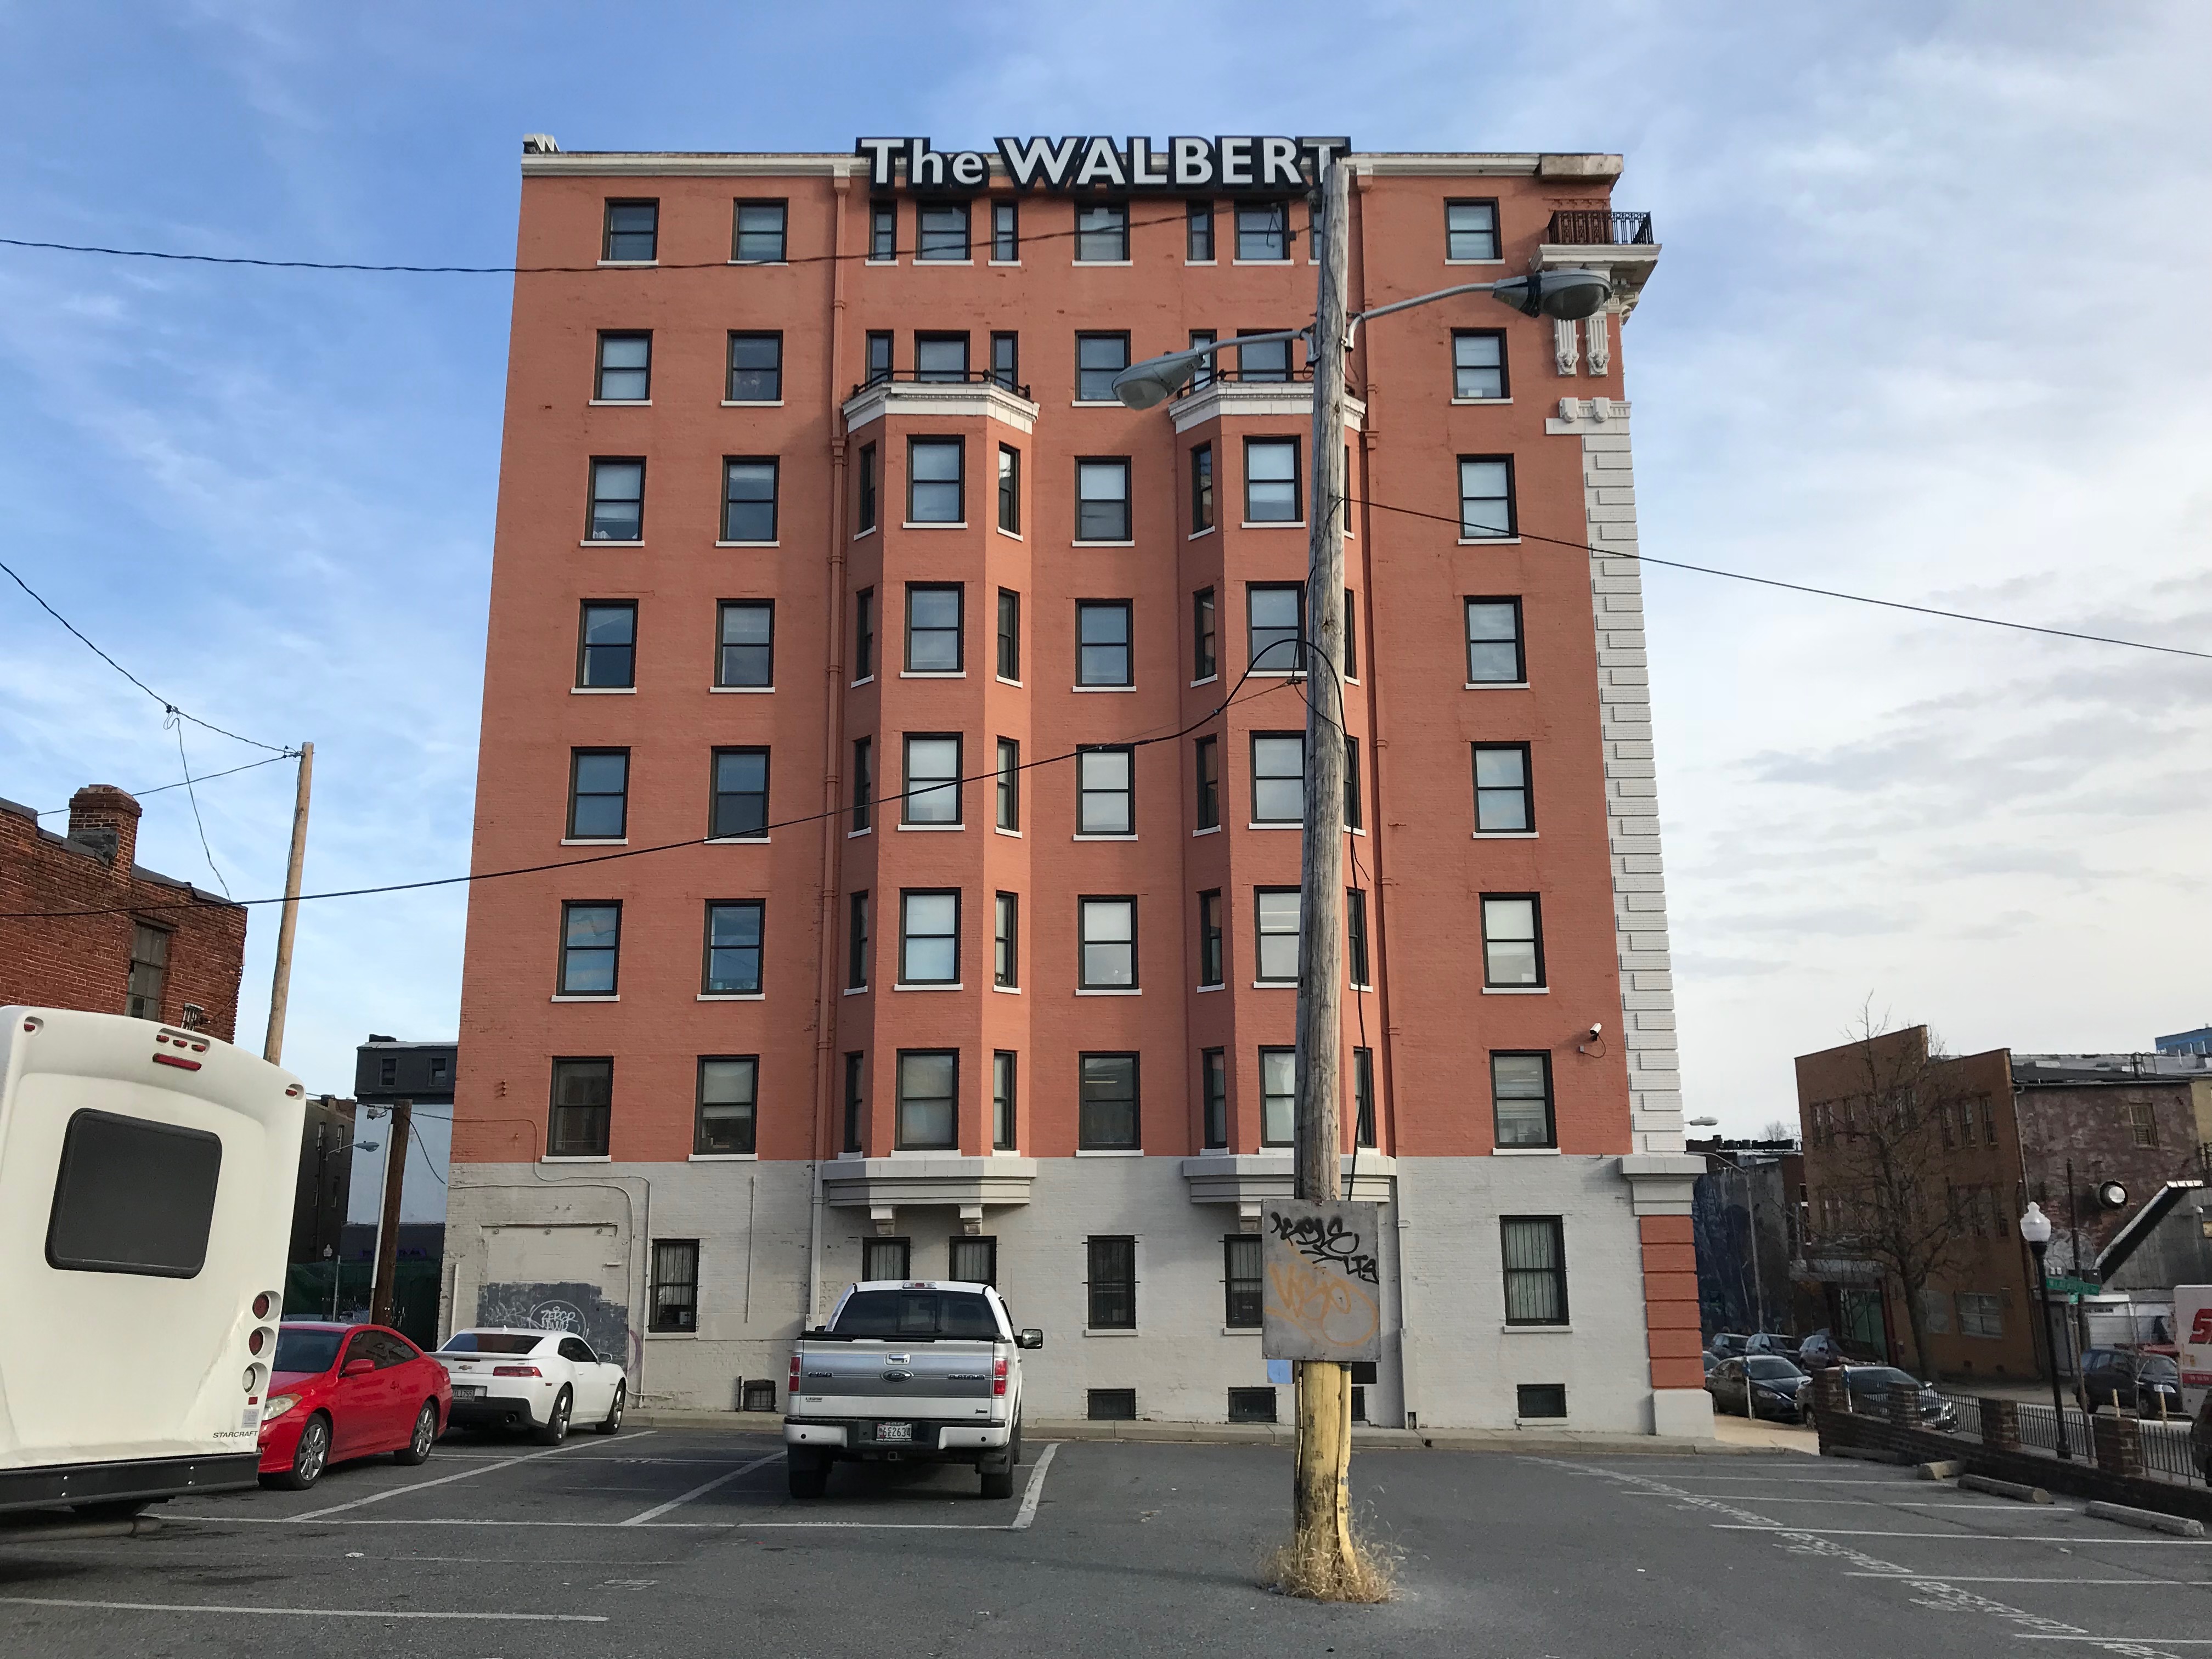 Rear facade (Maryland Avenue), The Walbert Building, 1800 N. Charles Street, Baltimore, MD 21201, Baltimore, Building, Car, Intersection, HQ Photo